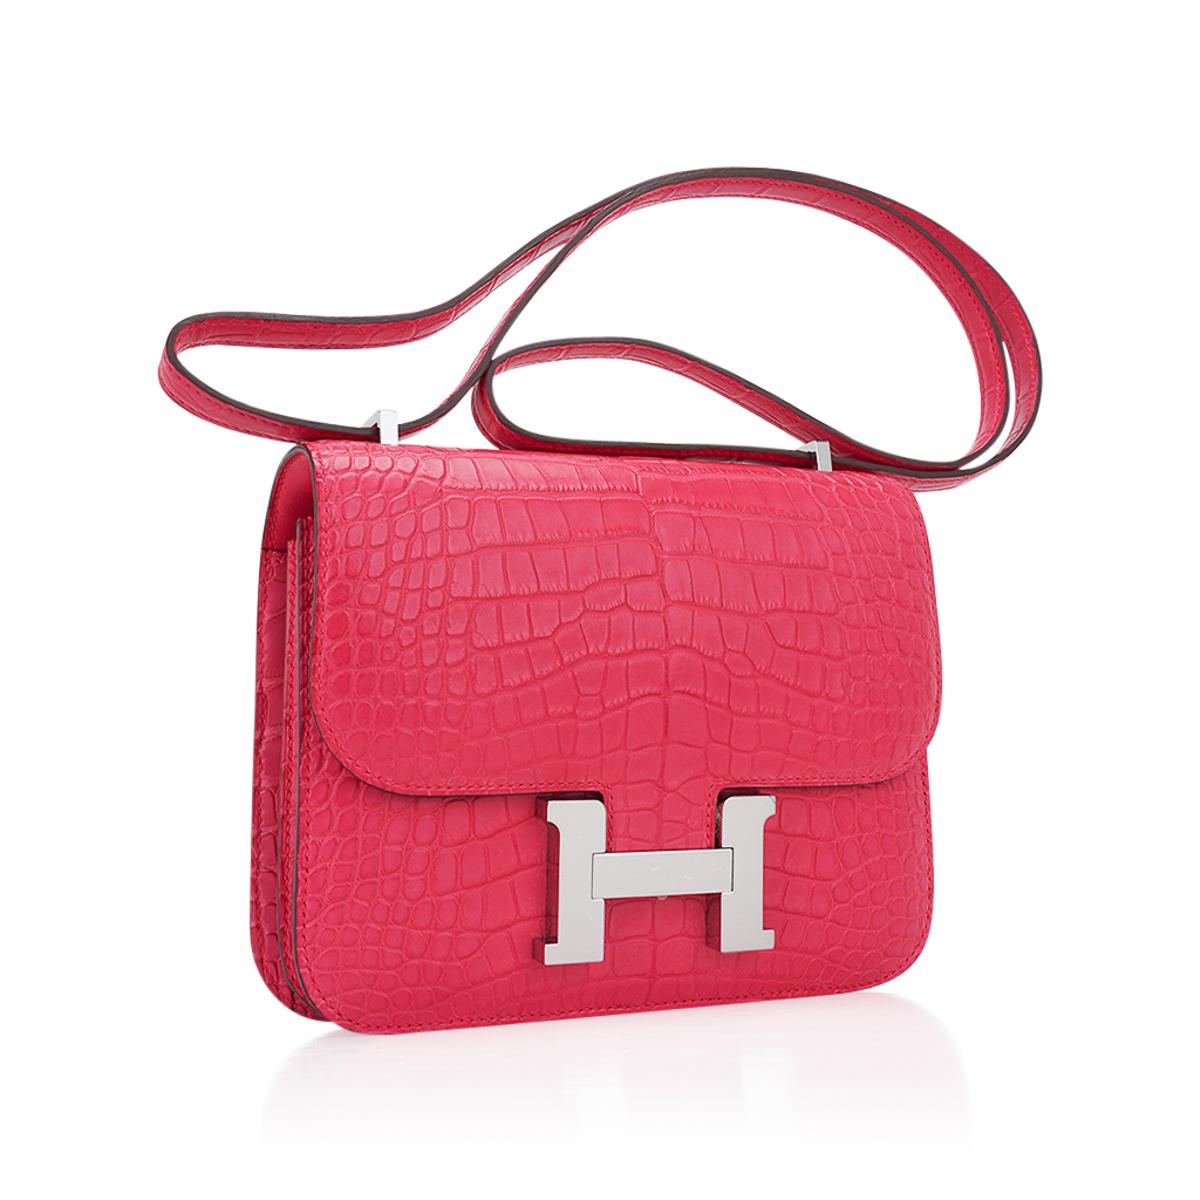 Mightychic offers an Hermes 18 Constance in richly saturated Rose Extreme Matte Alligator.
All grown up pink that is like a jewel in your hand.
Accentuated with Palladium hardware.
The effect is understated and fresh.
Hermes Paris Made in France is